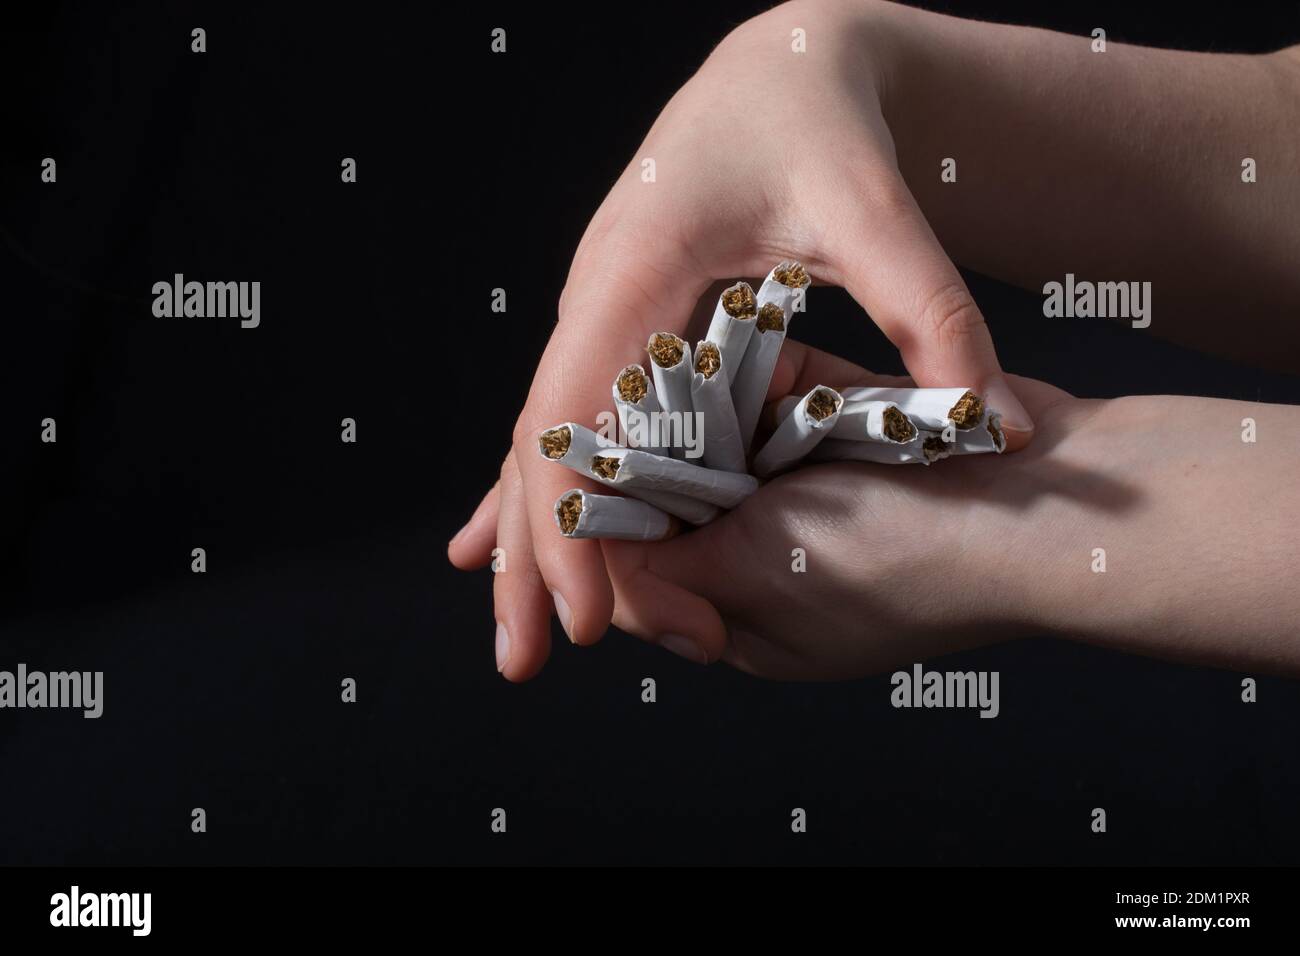 Cropped Hands Holding Cigarettes Against Black Background Stock Photo ...